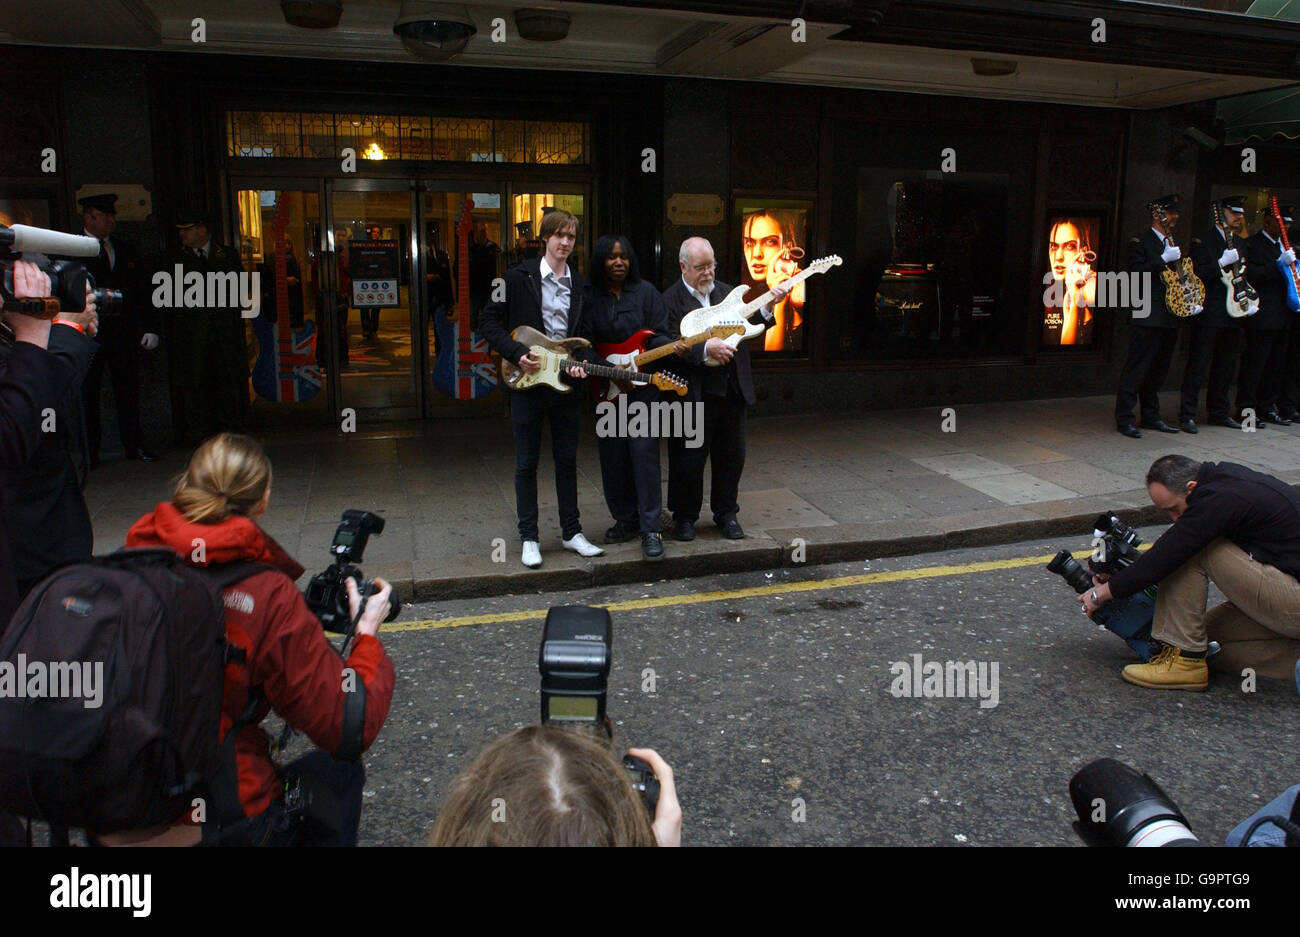 Daniel Gallagher, nephew of Rory Gallagher, Joan Armtrading and Sir Peter Blake launch Harrods Rocks, central London. Stock Photo